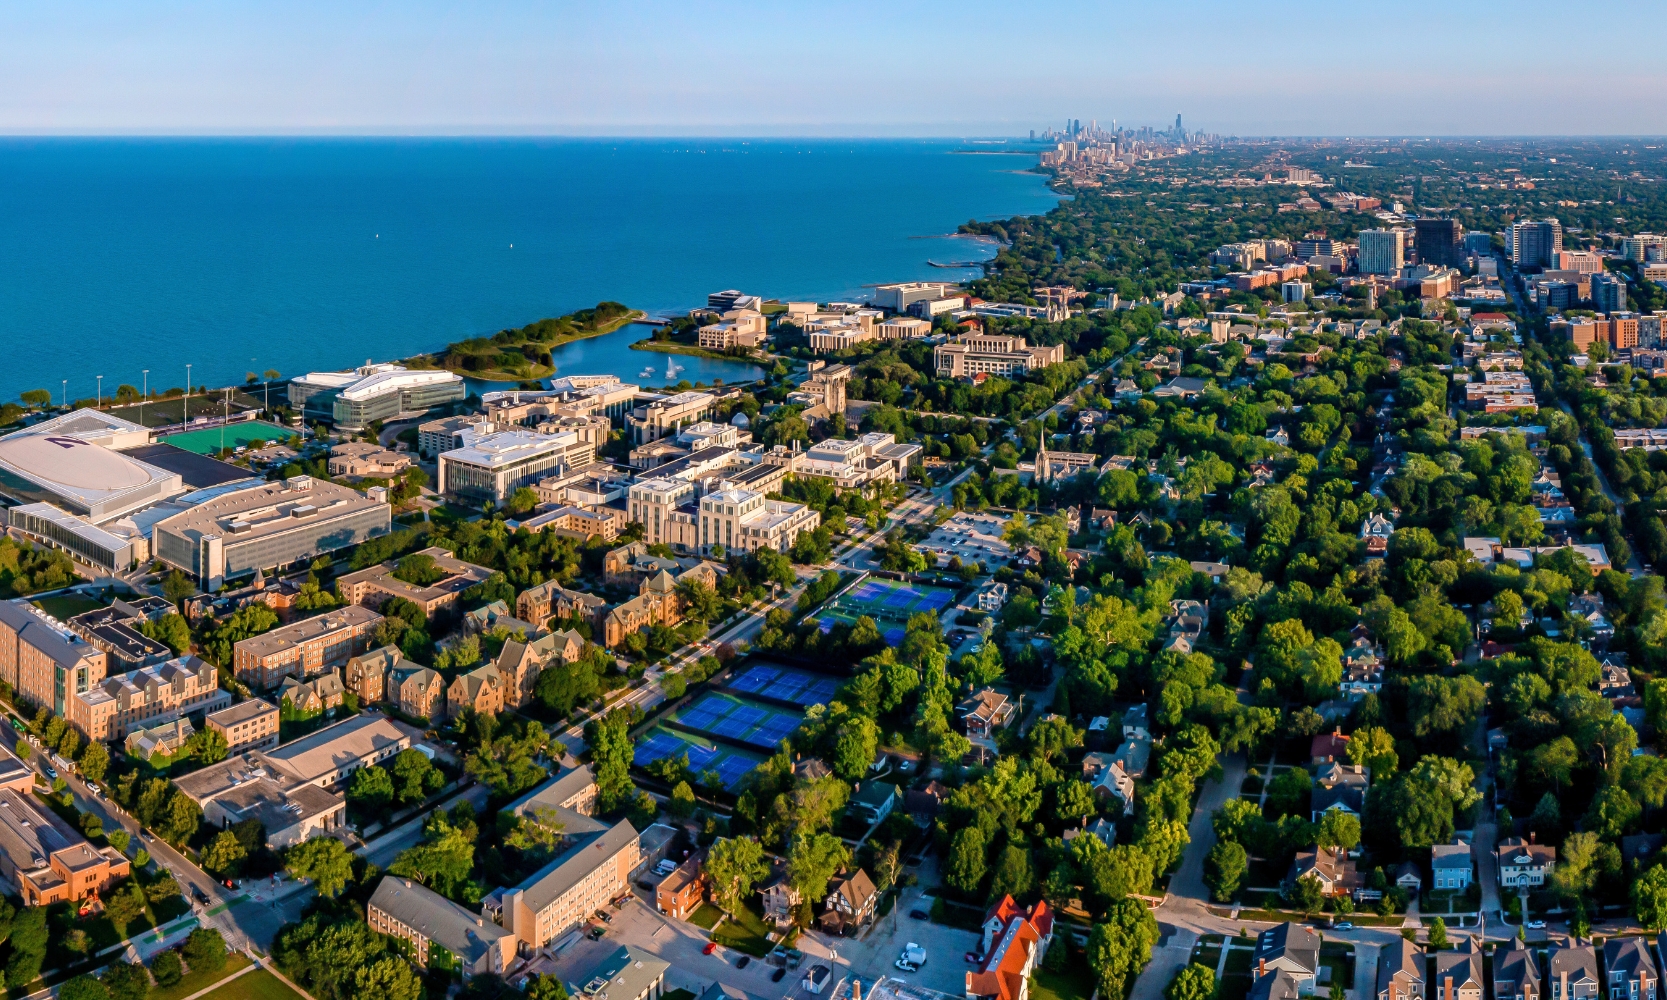 An aerial view image of Evanston, IL with the Chicago skyline in the background